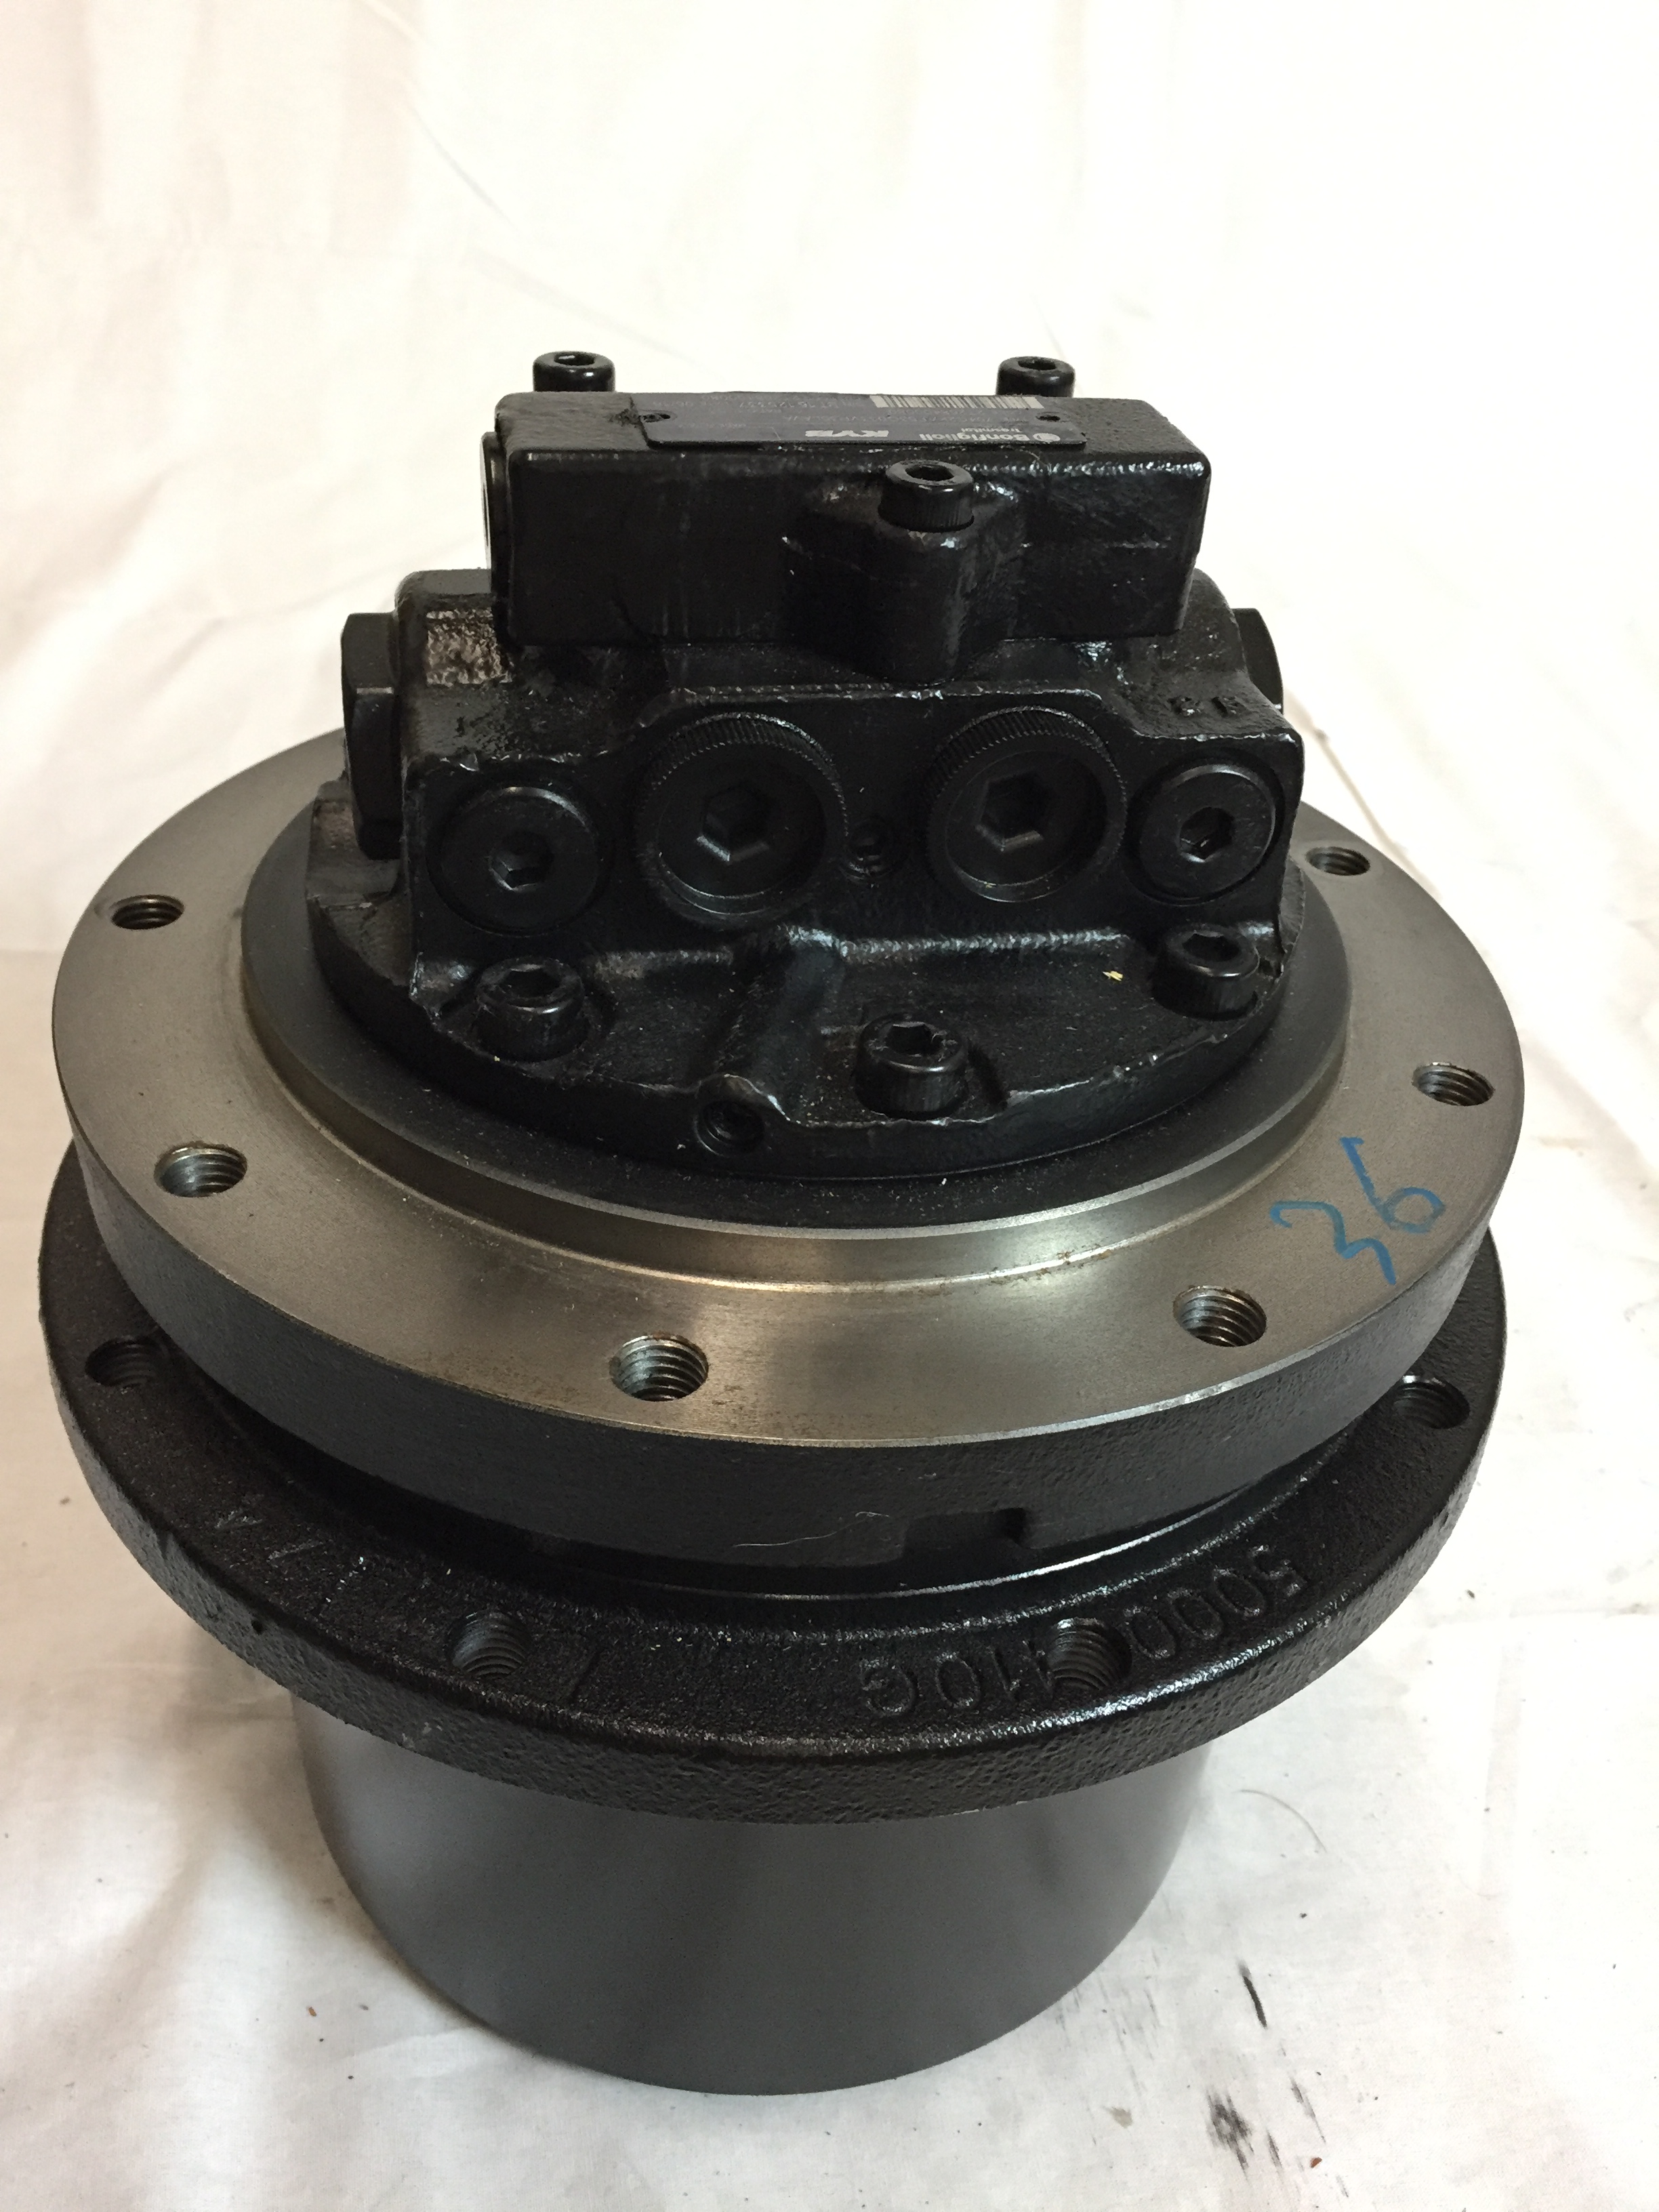 EX40U-2 Complete Final Drive (Planetary/Travel Drive) with Motor (LOW S/N 244001-274999) #4628892,0922101